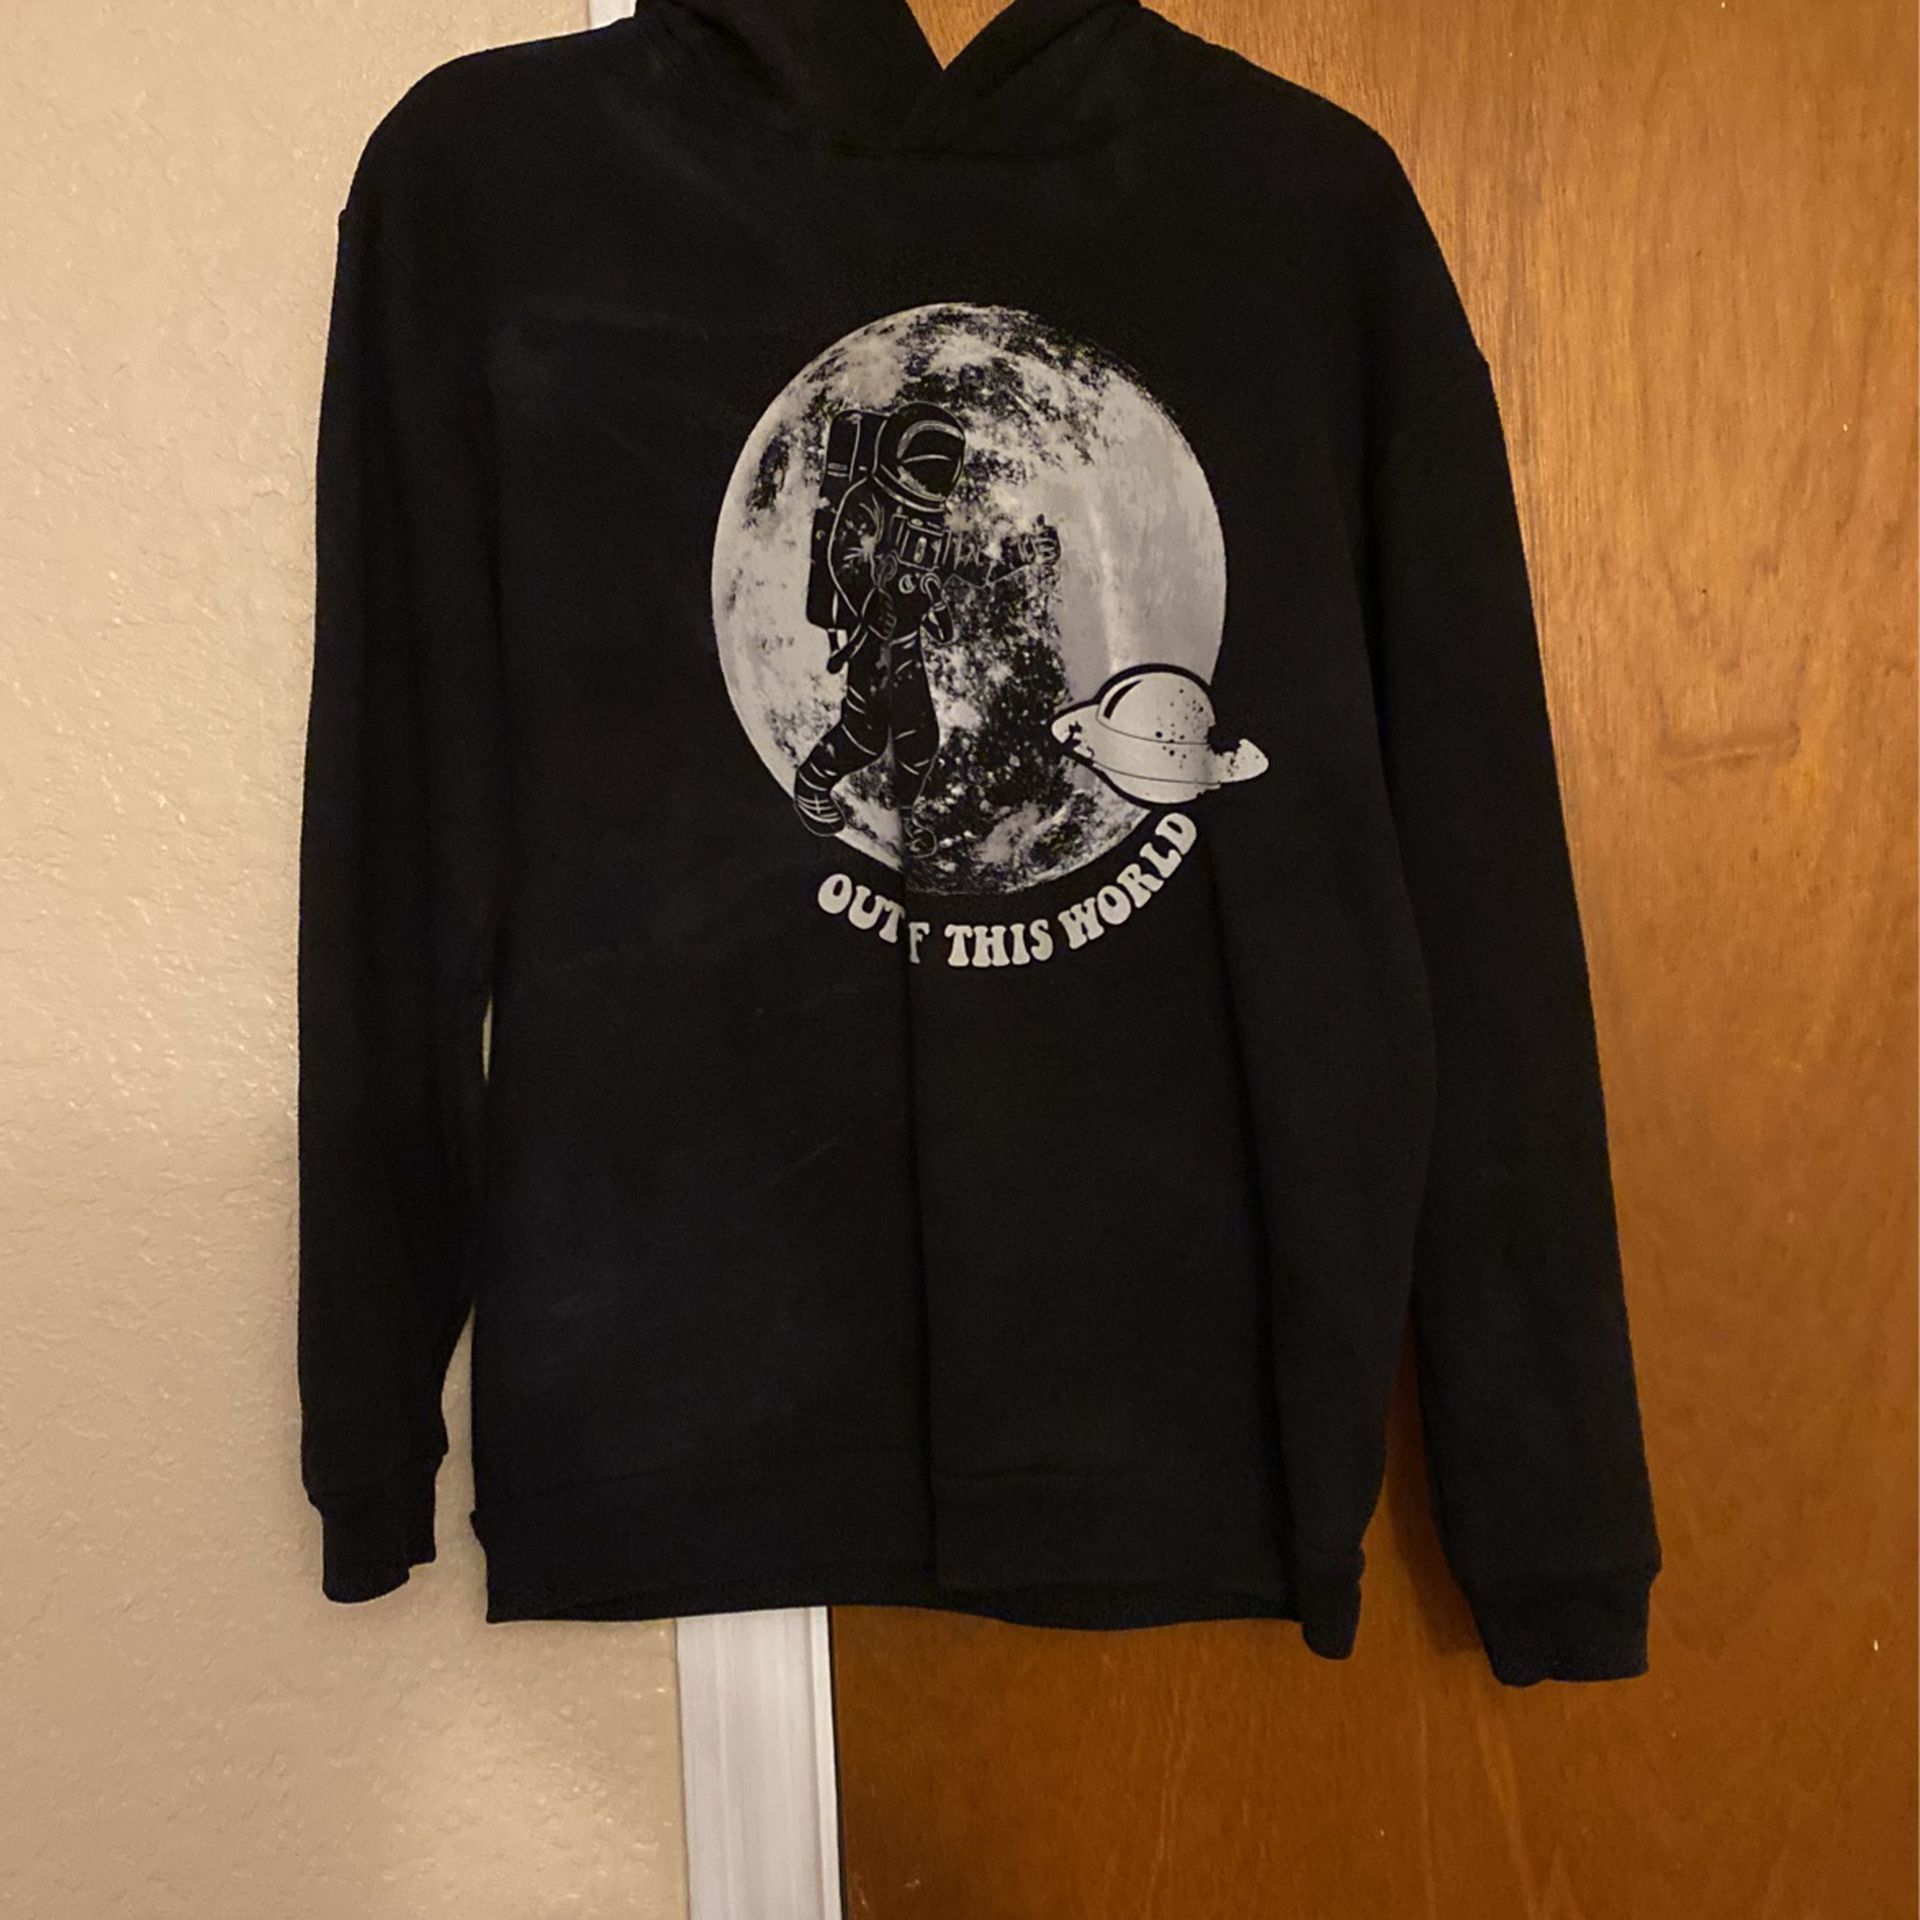 Black Hoodie Size 14/16 Youth size 